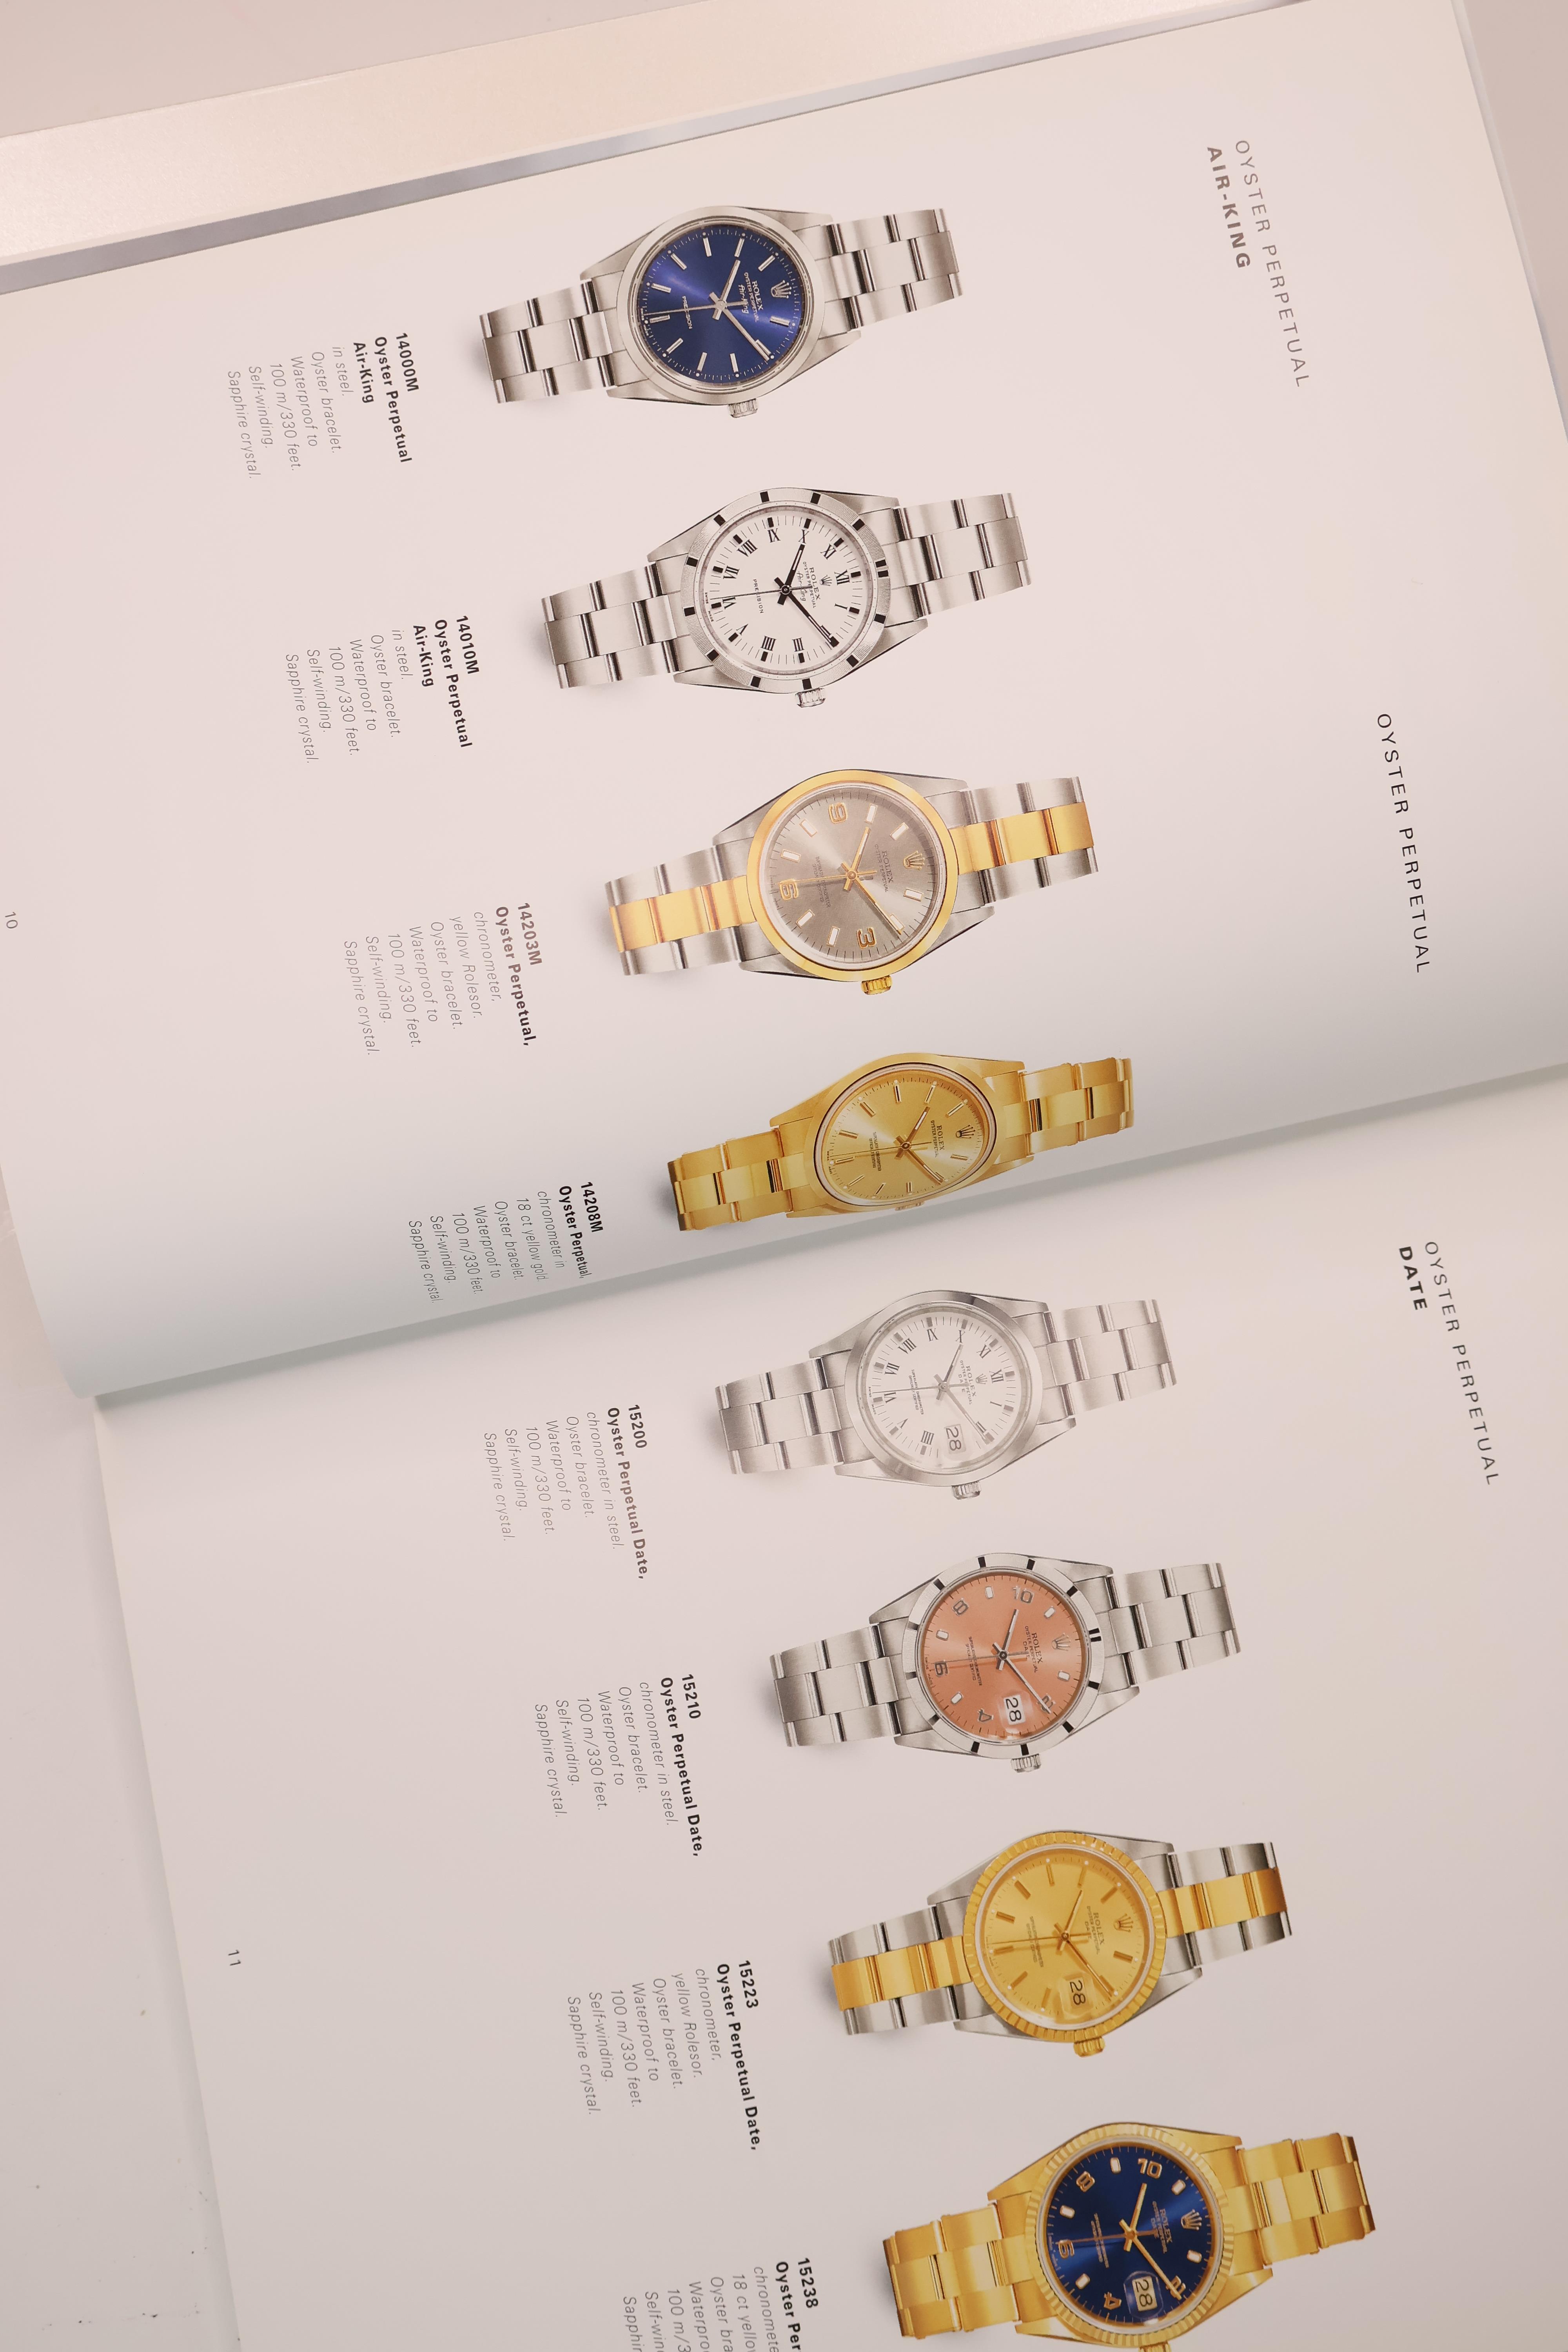 *To Be Sold Without Reserve* Rolex Oyster Perpetual book - Image 3 of 3